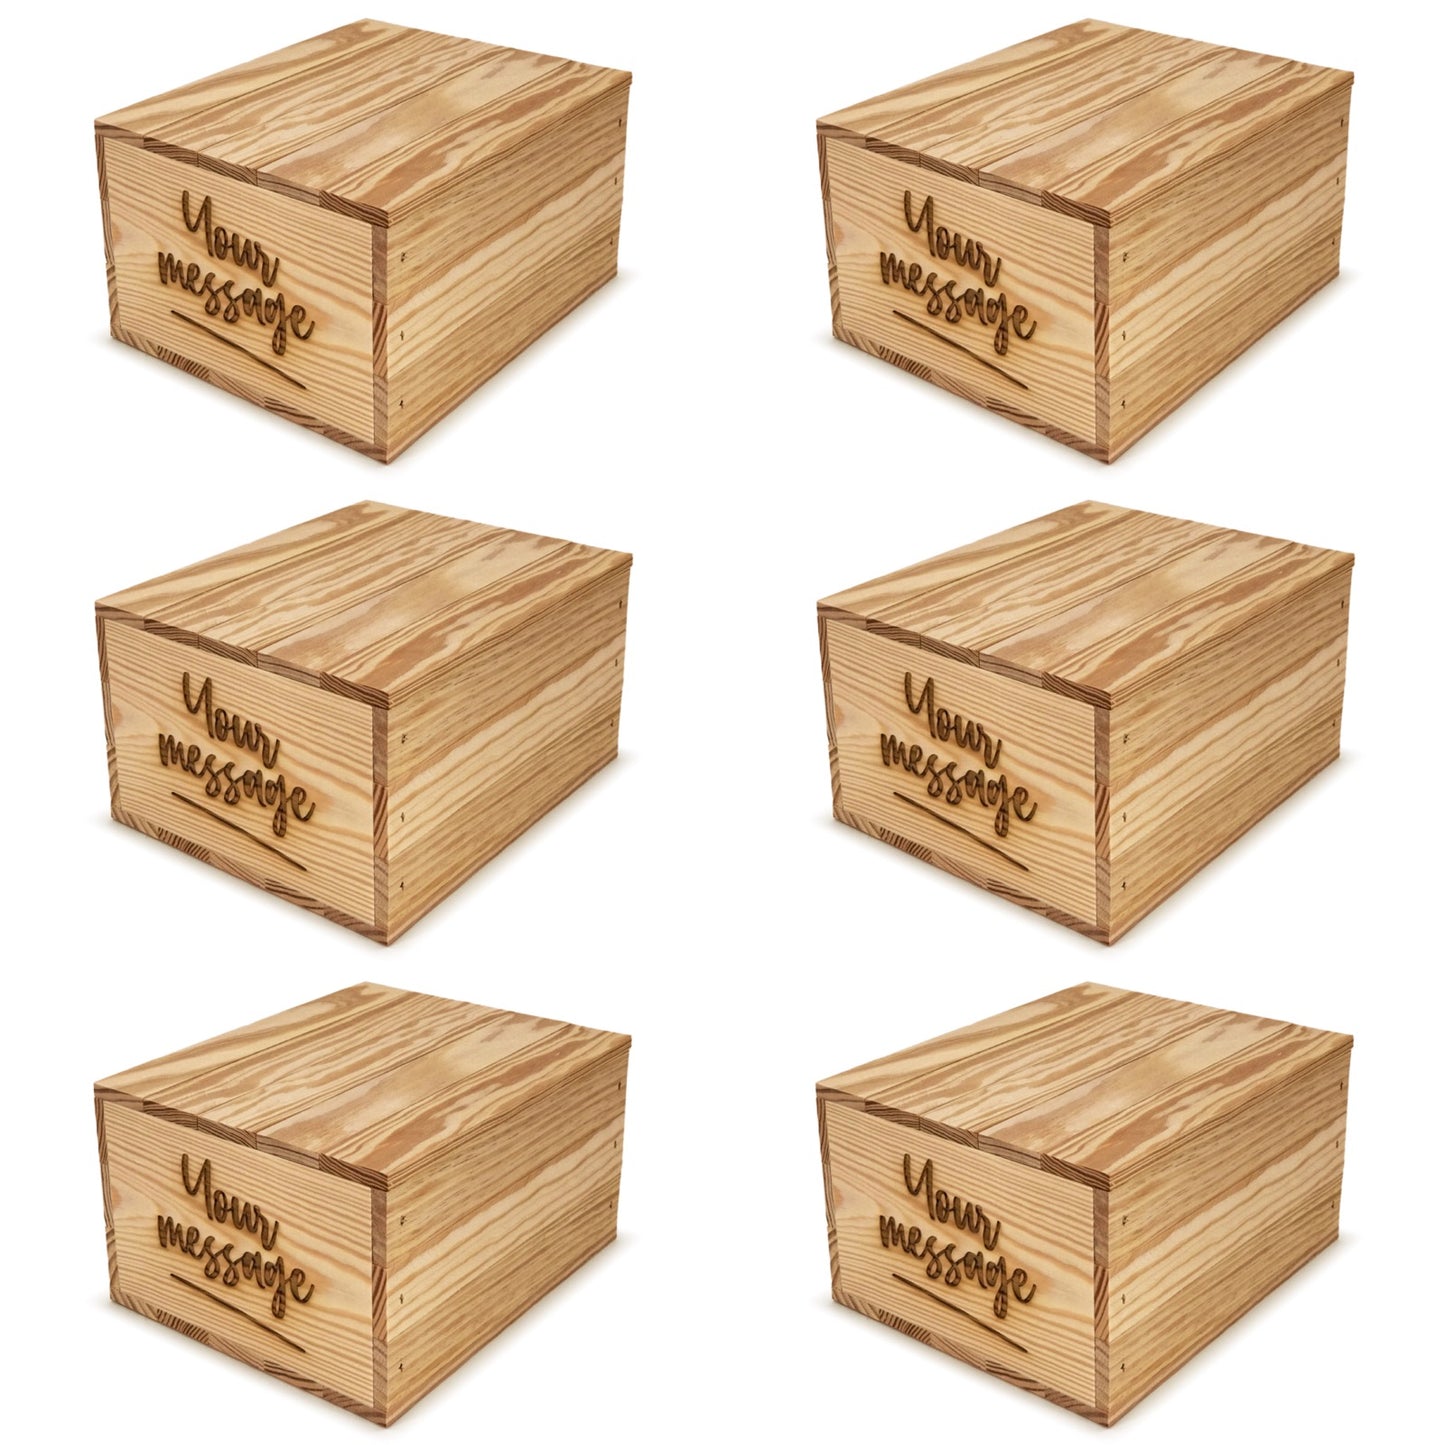 6 small wooden crates with lid and custom message on the end 9x8x5.25